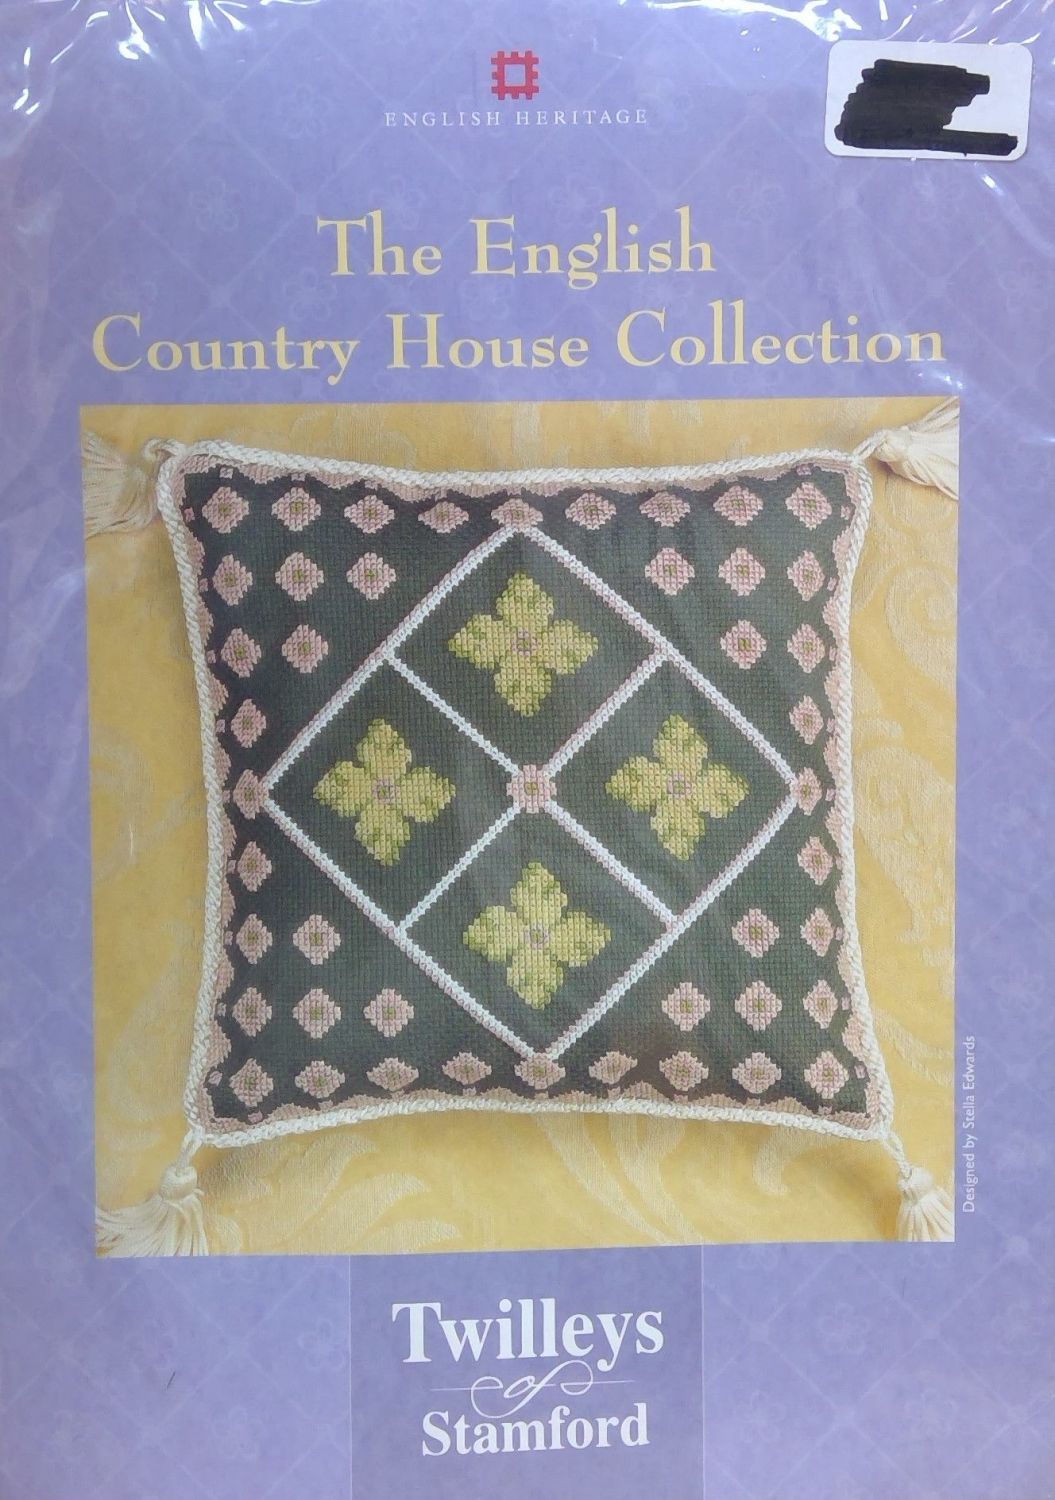 TWILLEYS OF STAMFORD CROSS STITCH -ENGLISH HERITAGE COUNTRY HOUSE COLLECTIO